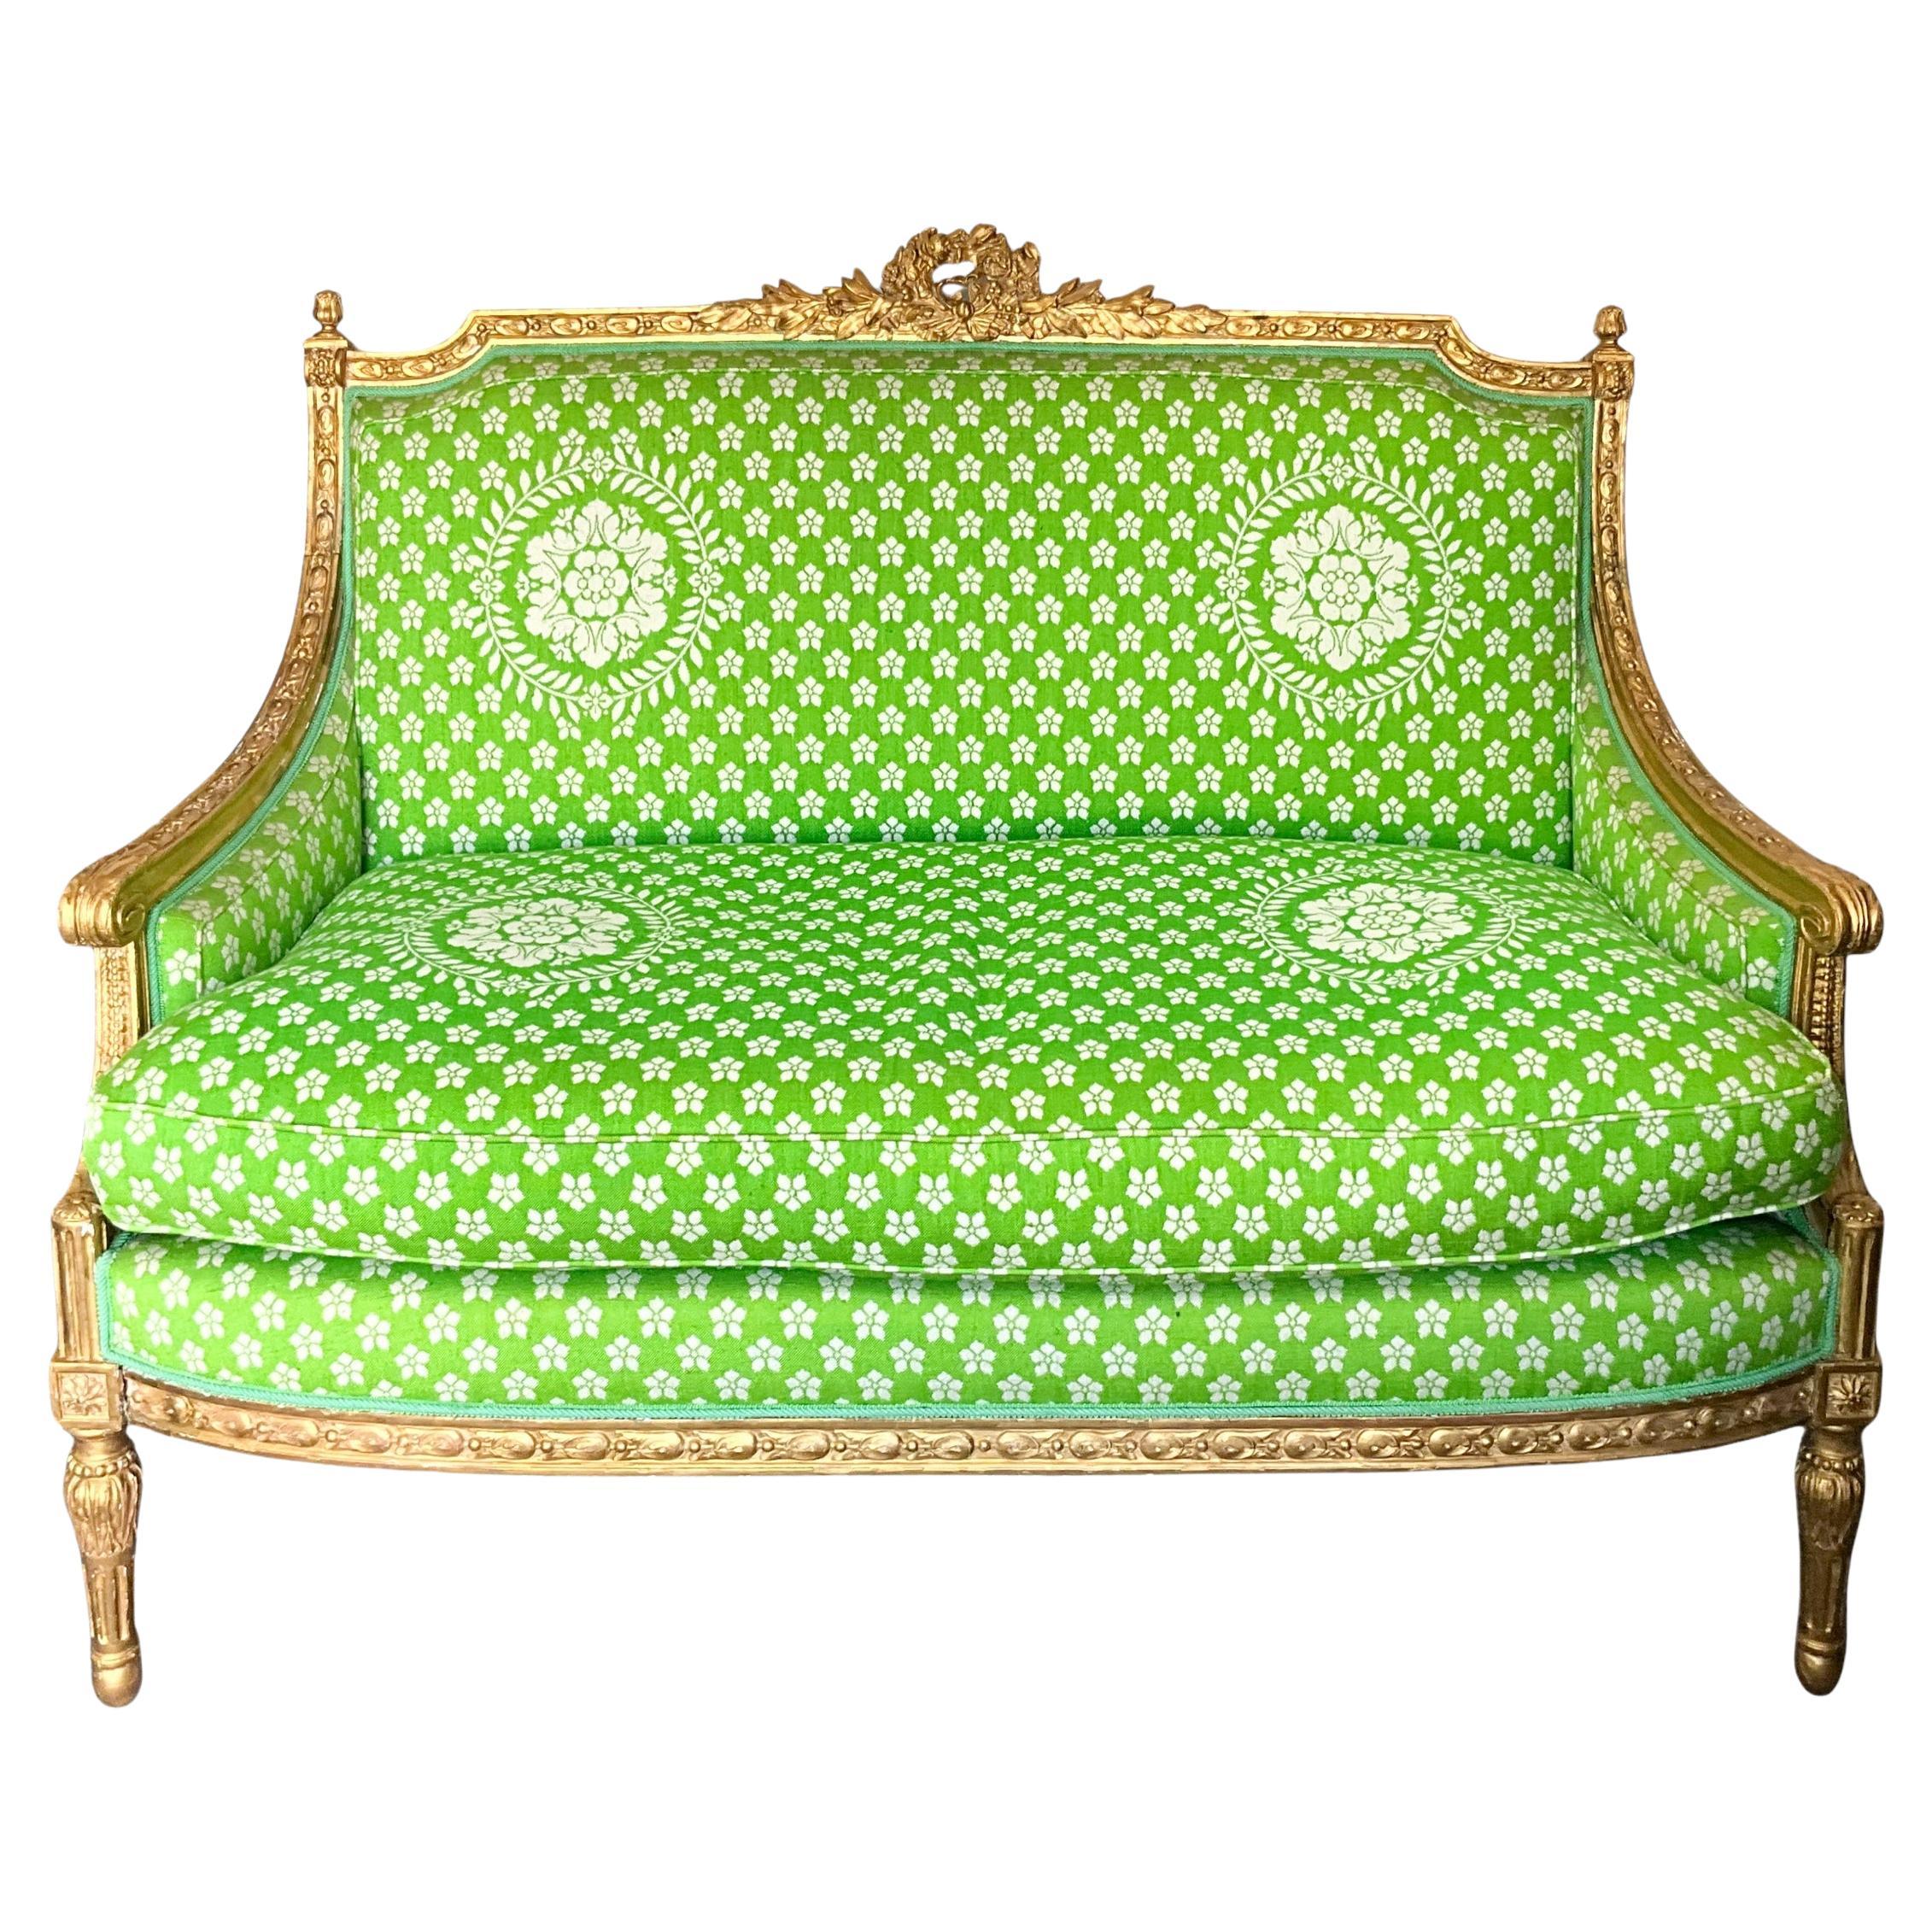 This is such a lovely piece! It is a 19th century French Louis XVI style carved giltwood settee in vintage upholstery. The frame shows some non-offensive chippiness. The upholstery is in very good condition with the exception of two notable stains